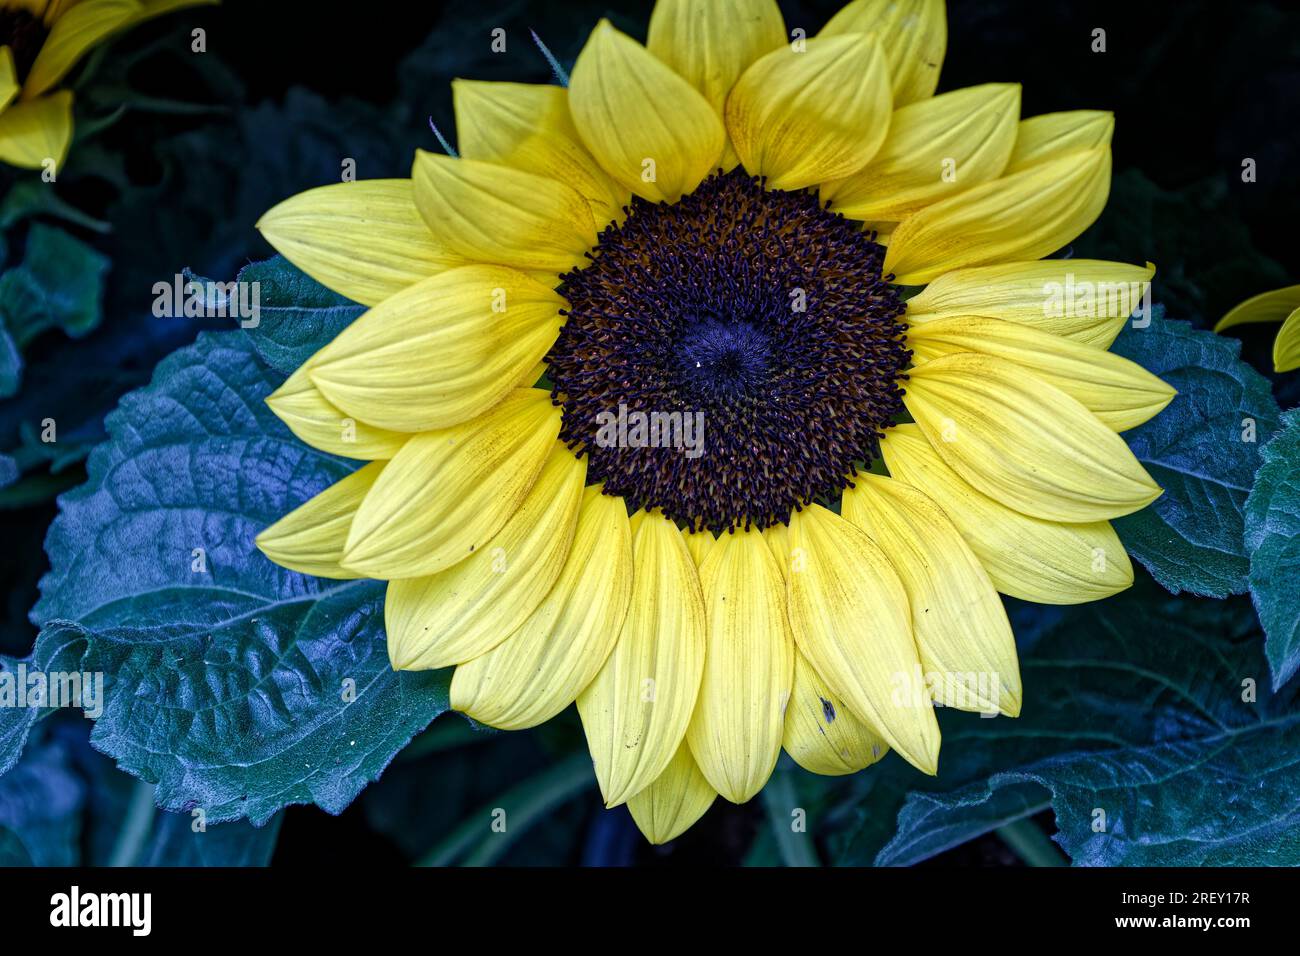 Paris, France. July 29, 2023. Sunflower, a flower that is used in the manufacture of oil, from its seeds. Credit: Gabriel MIHAI / Alamy Stock Photo Stock Photo